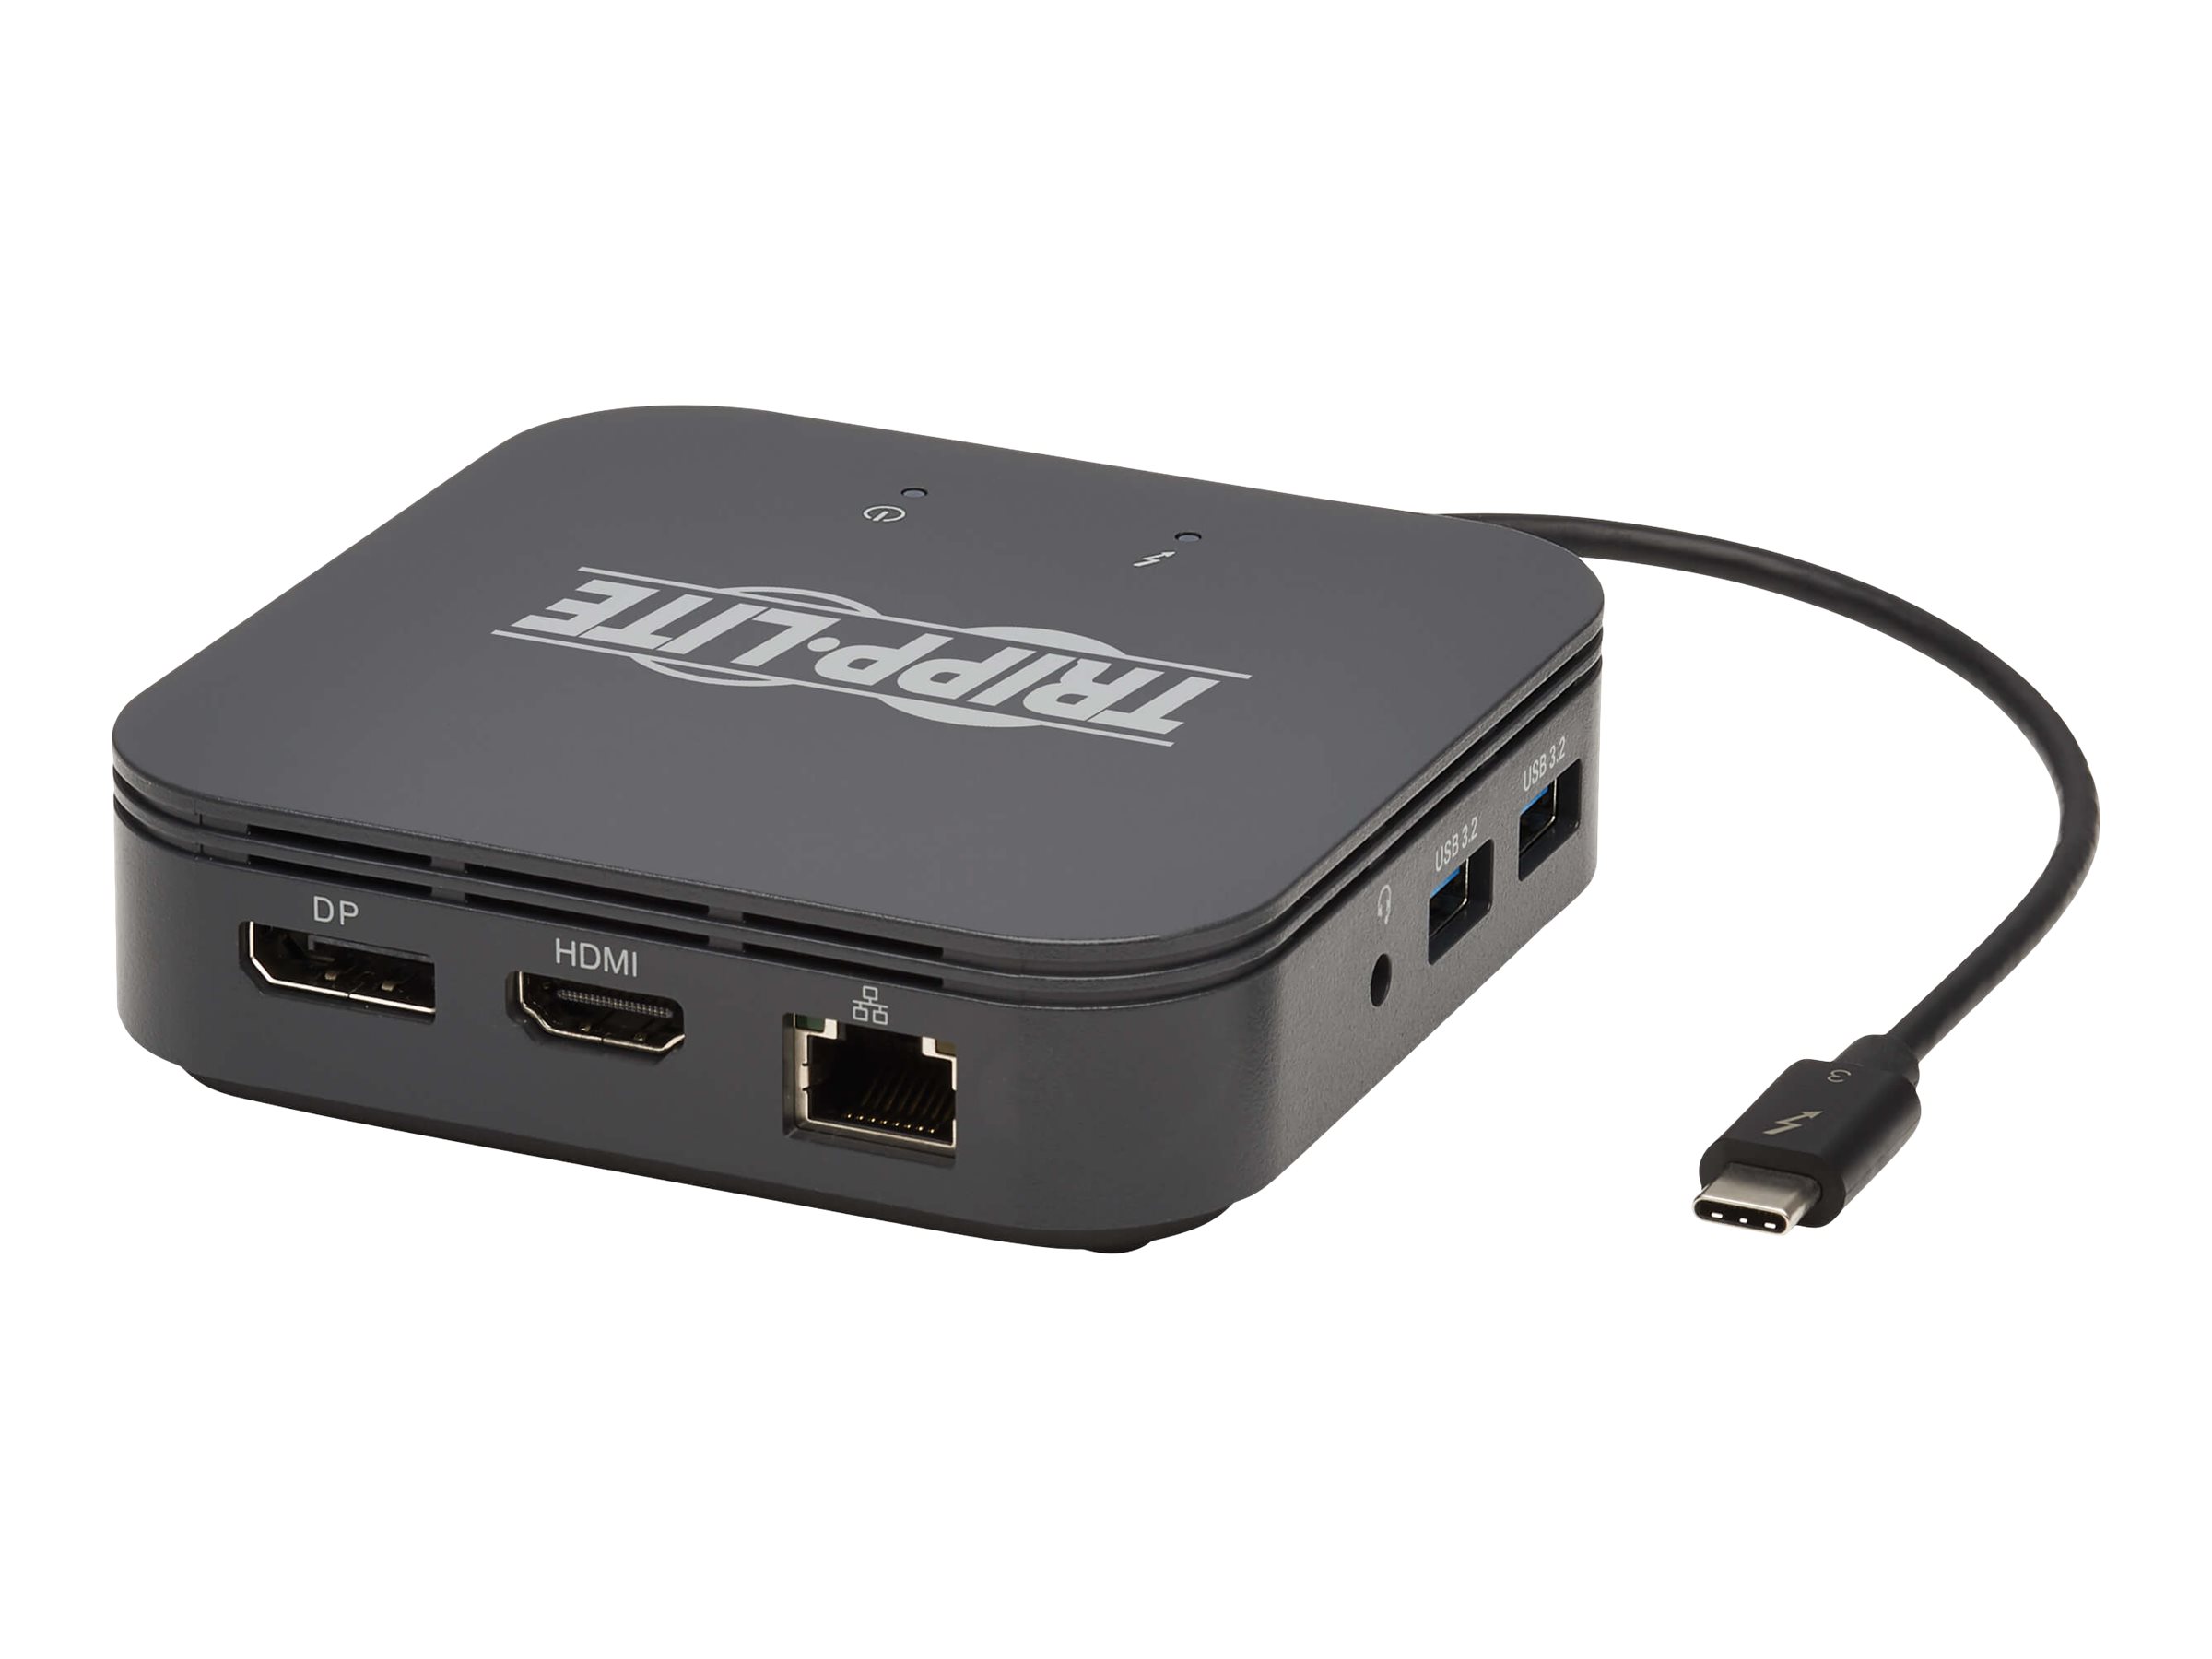 Tripp Lite DisplayPort 1.4 Cable with Latching Connectors - 8K UHD, HDR,  4:2:0, HDCP 2.2, M/M, Black, 6 ft. 